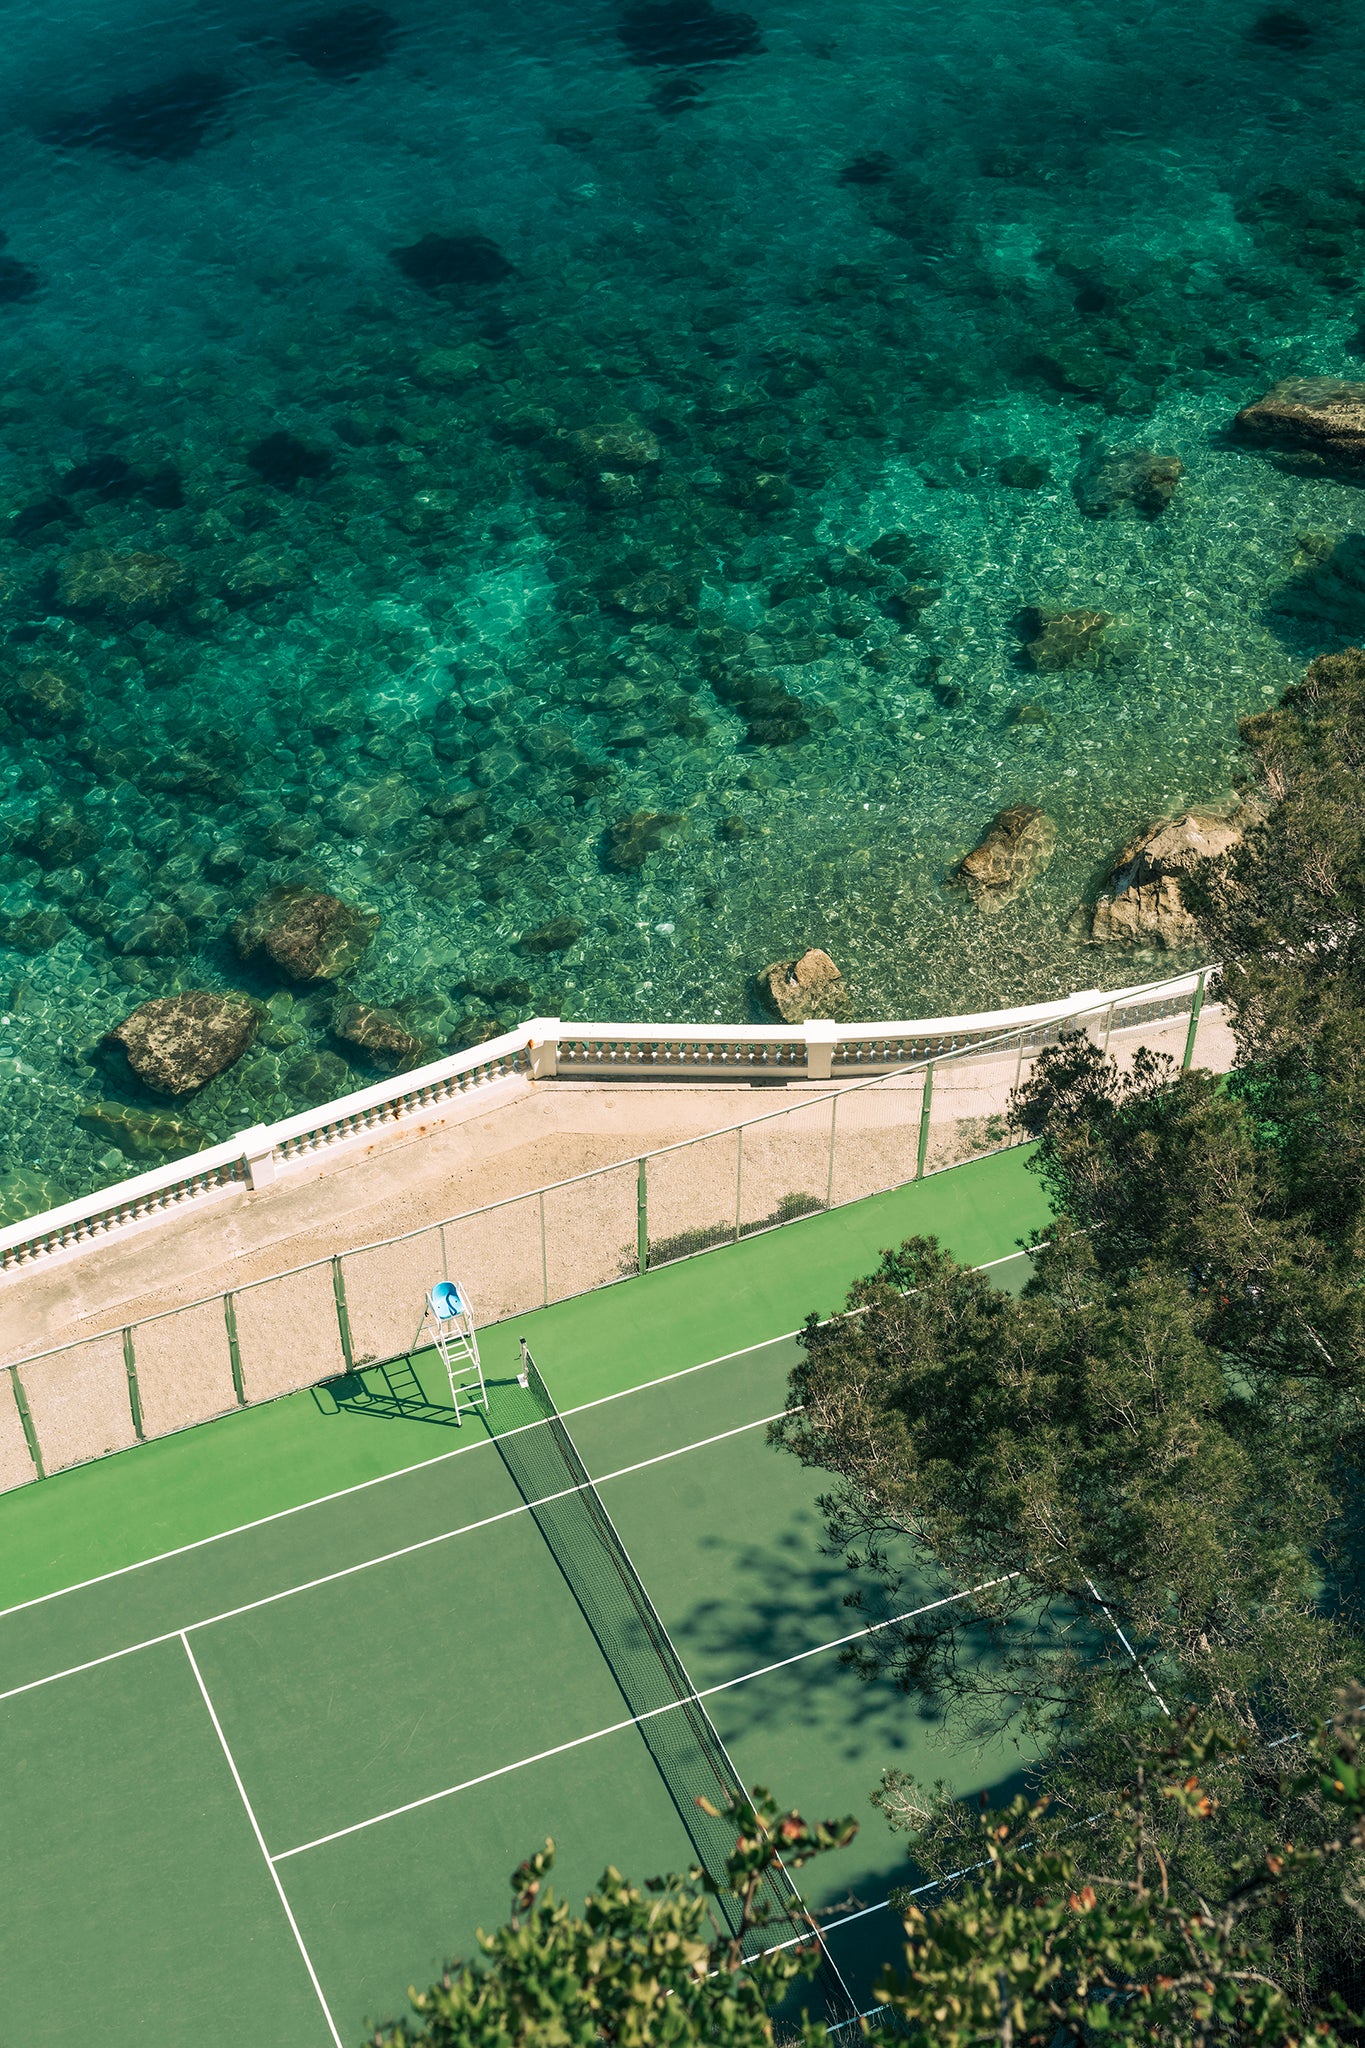 Tennis on the Med